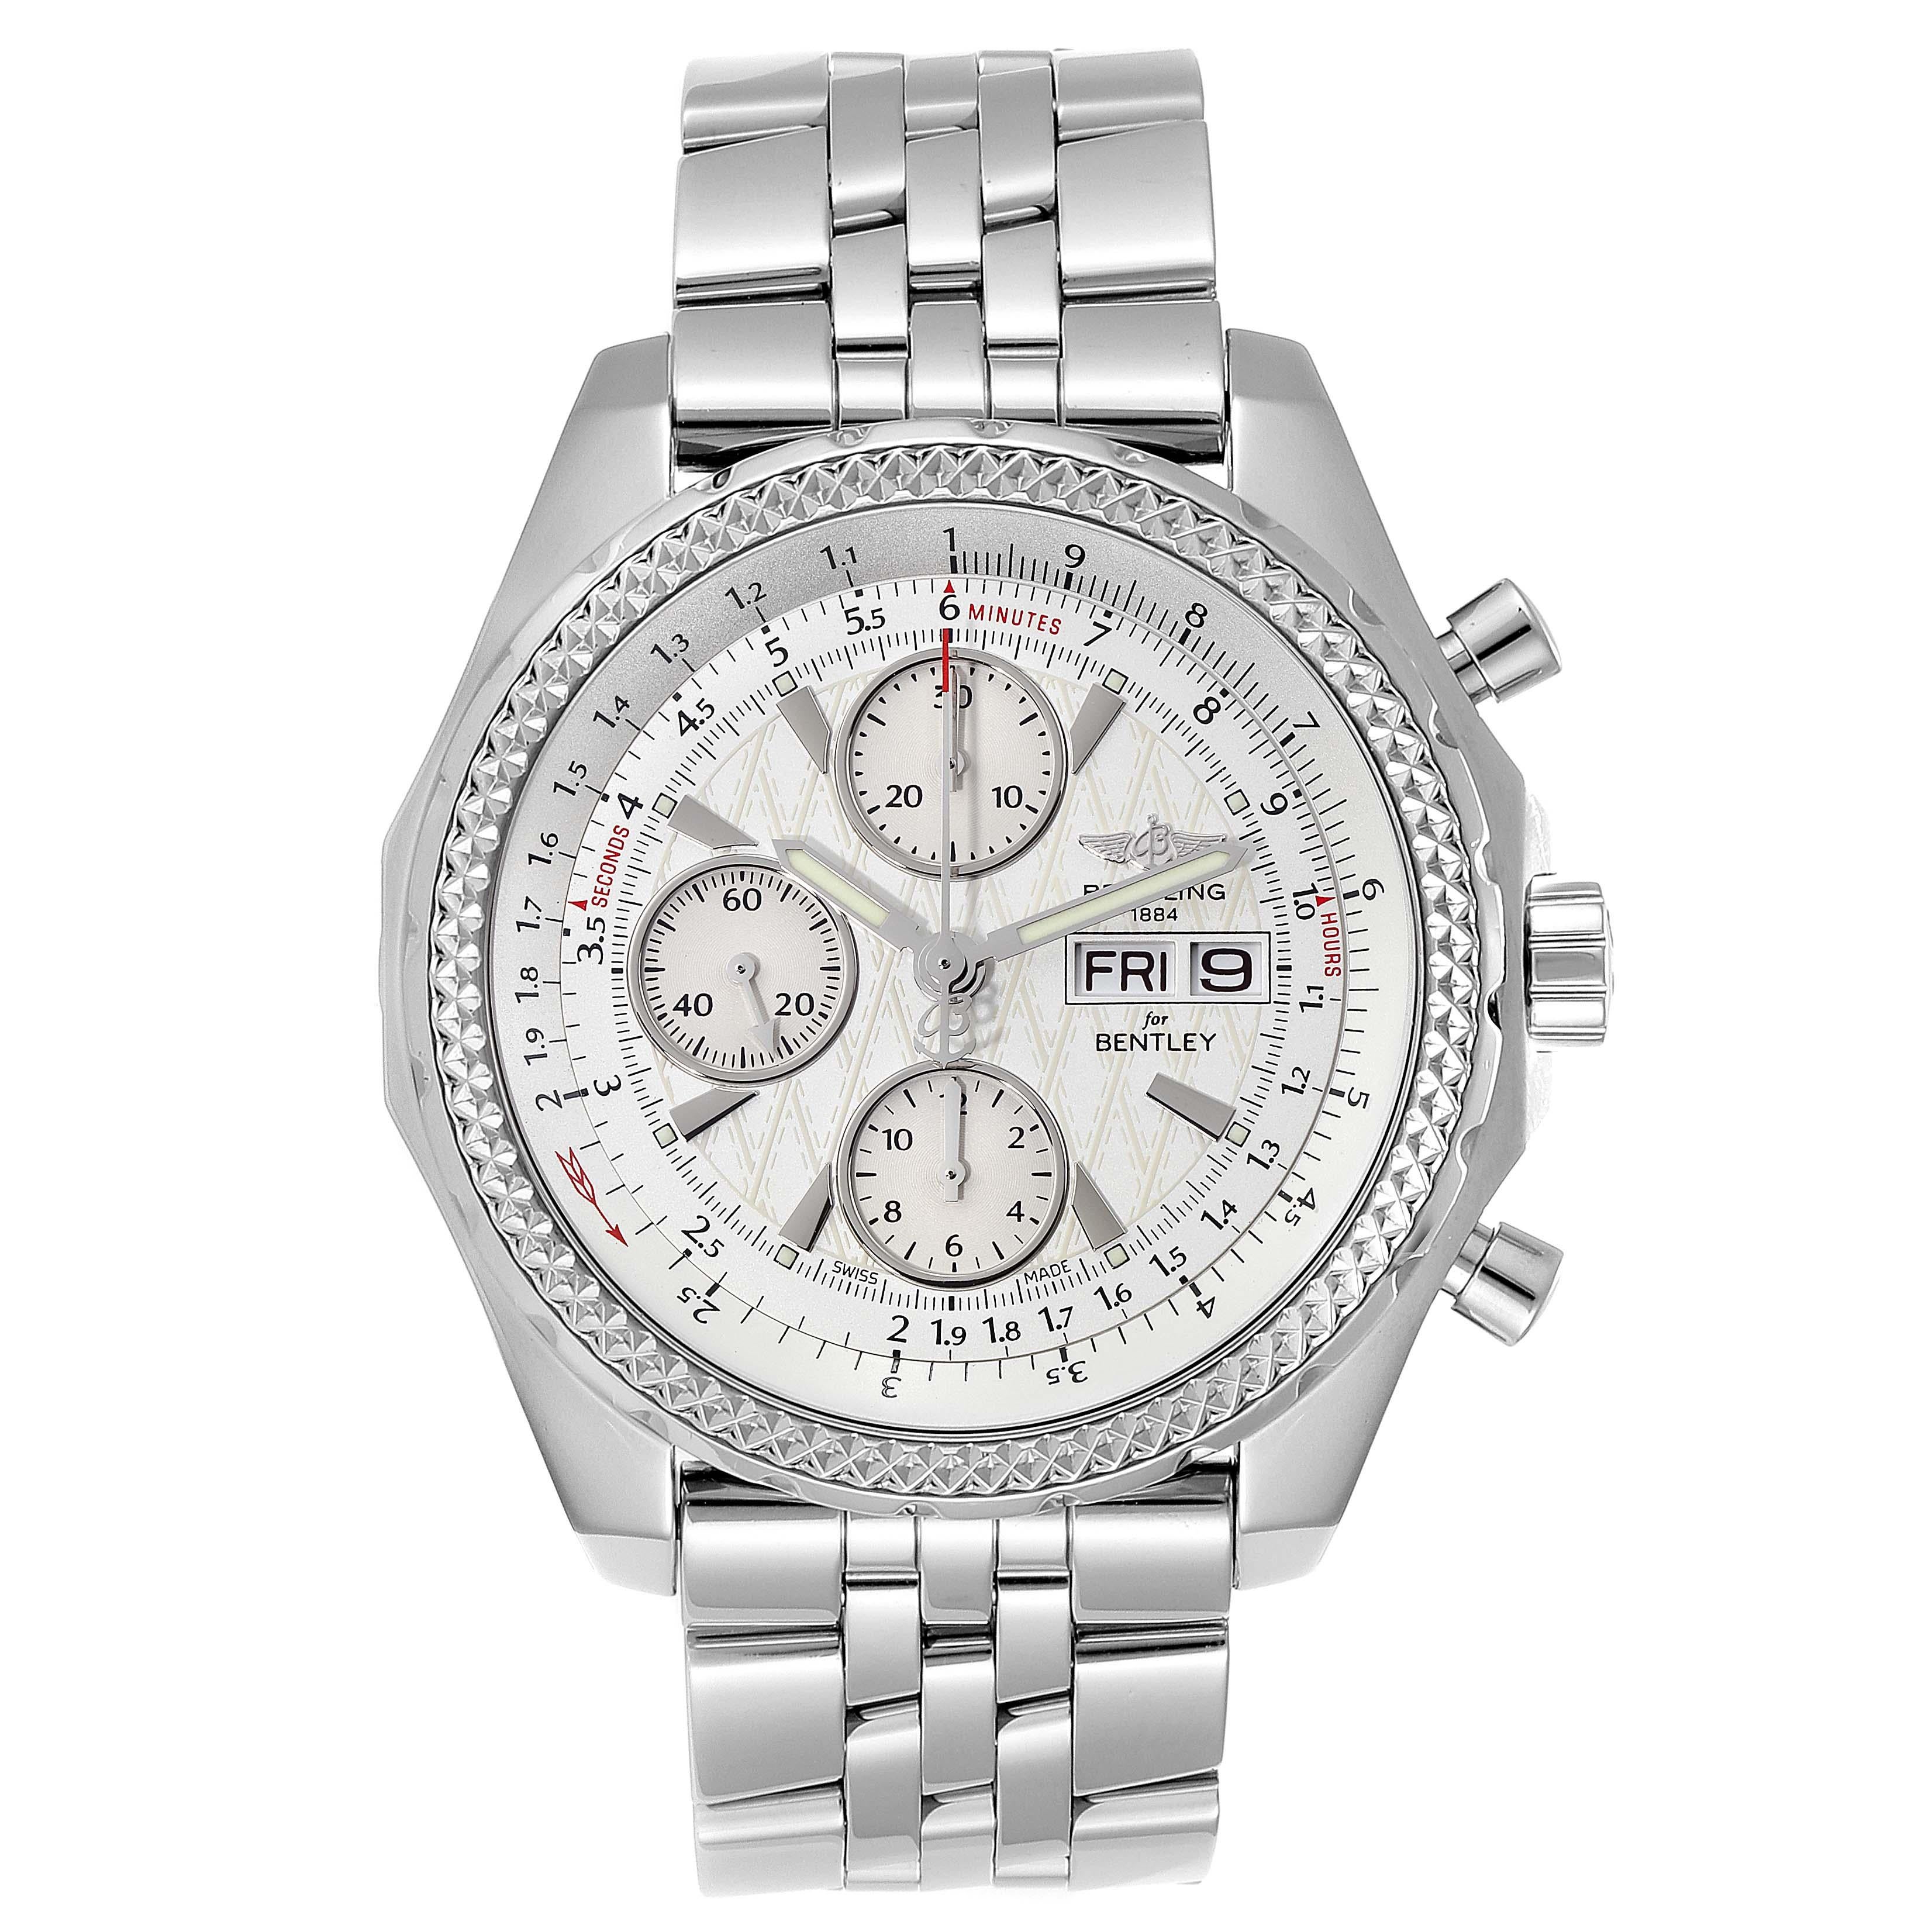 Breitling Bentley Motors GT Special Edition Mens Watch A13362 Box Card. Self-winding automatic officially certified chronometer movement. Chronograph function. Stainless steel case 44.8 mm in diameter. Stainless steel screwed-down crown and pushers.